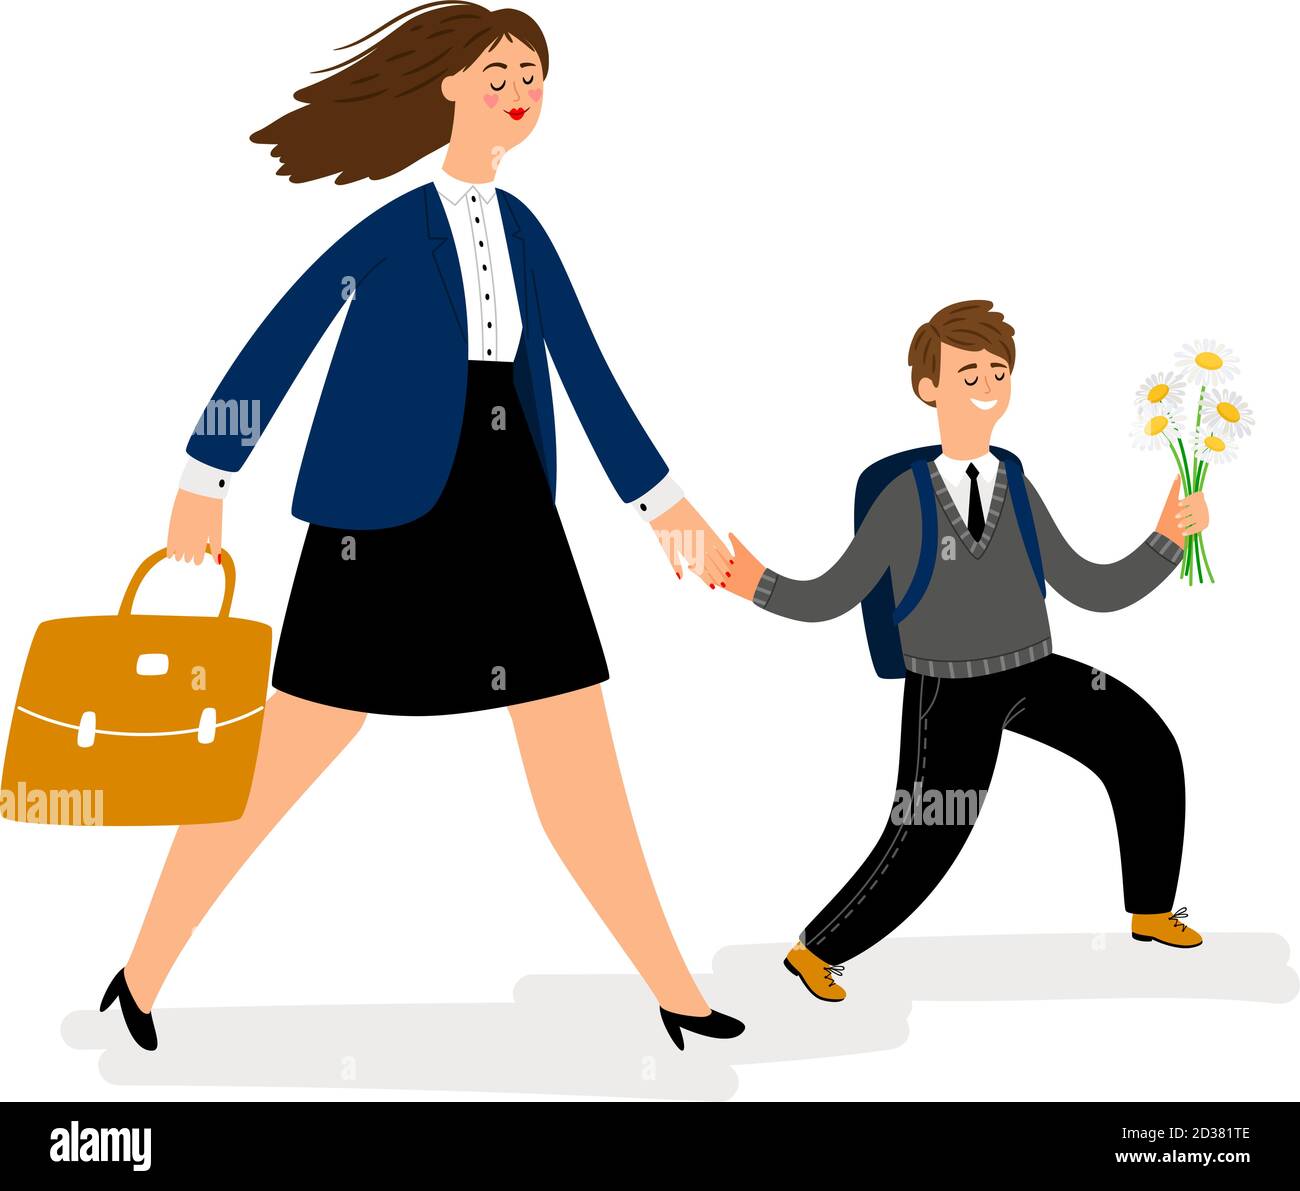 Mother with son going in school, boy bring flowers. Parent hold kid and walk to study. Vector illustration Stock Vector